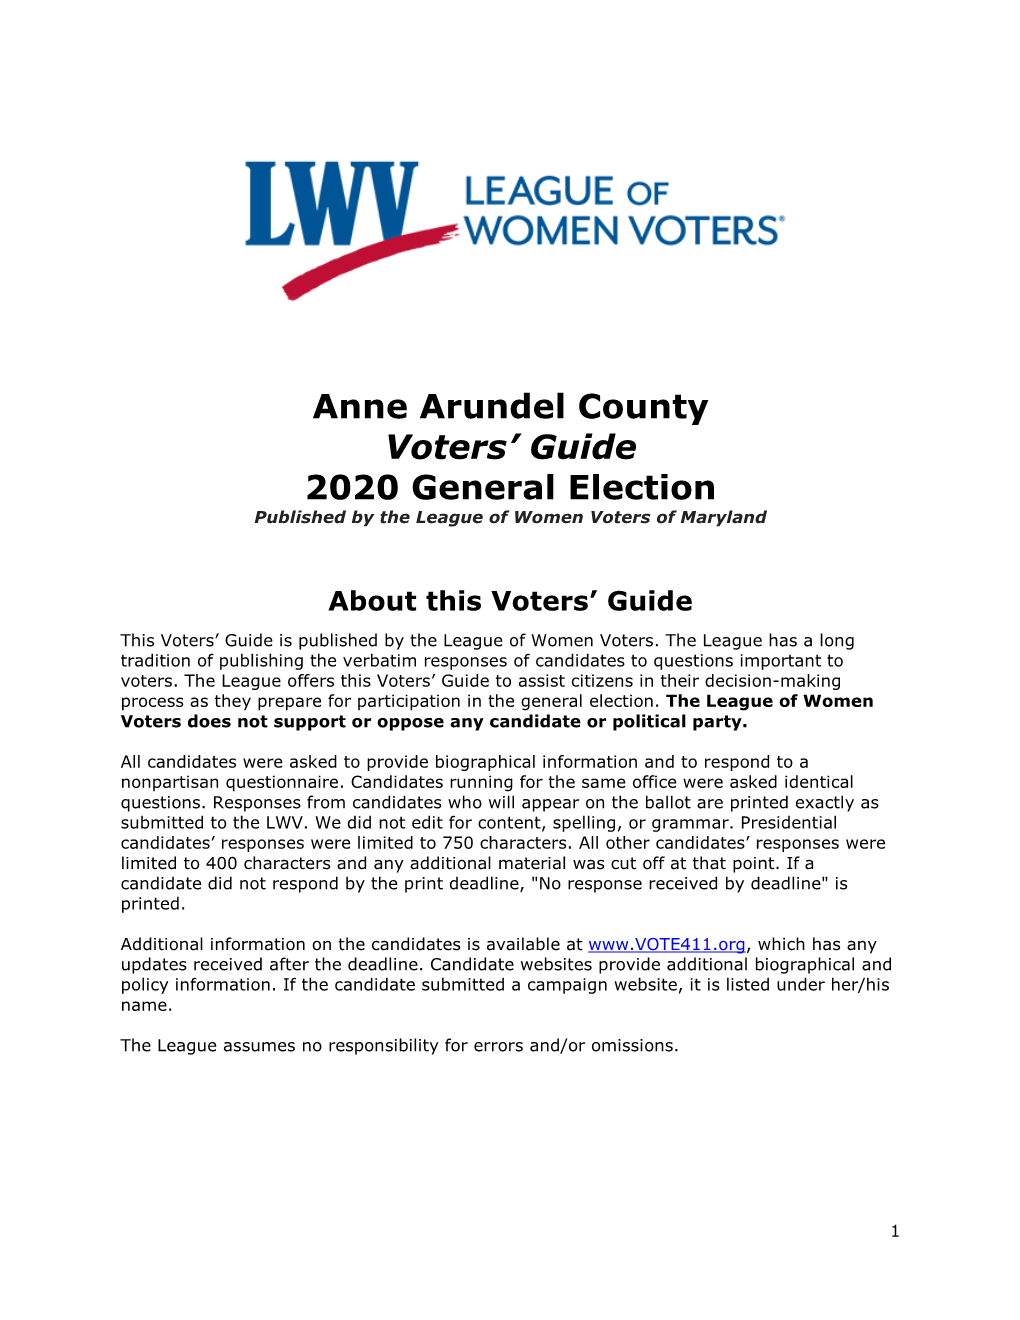 Anne Arundel County Voters' Guide 2020 Election